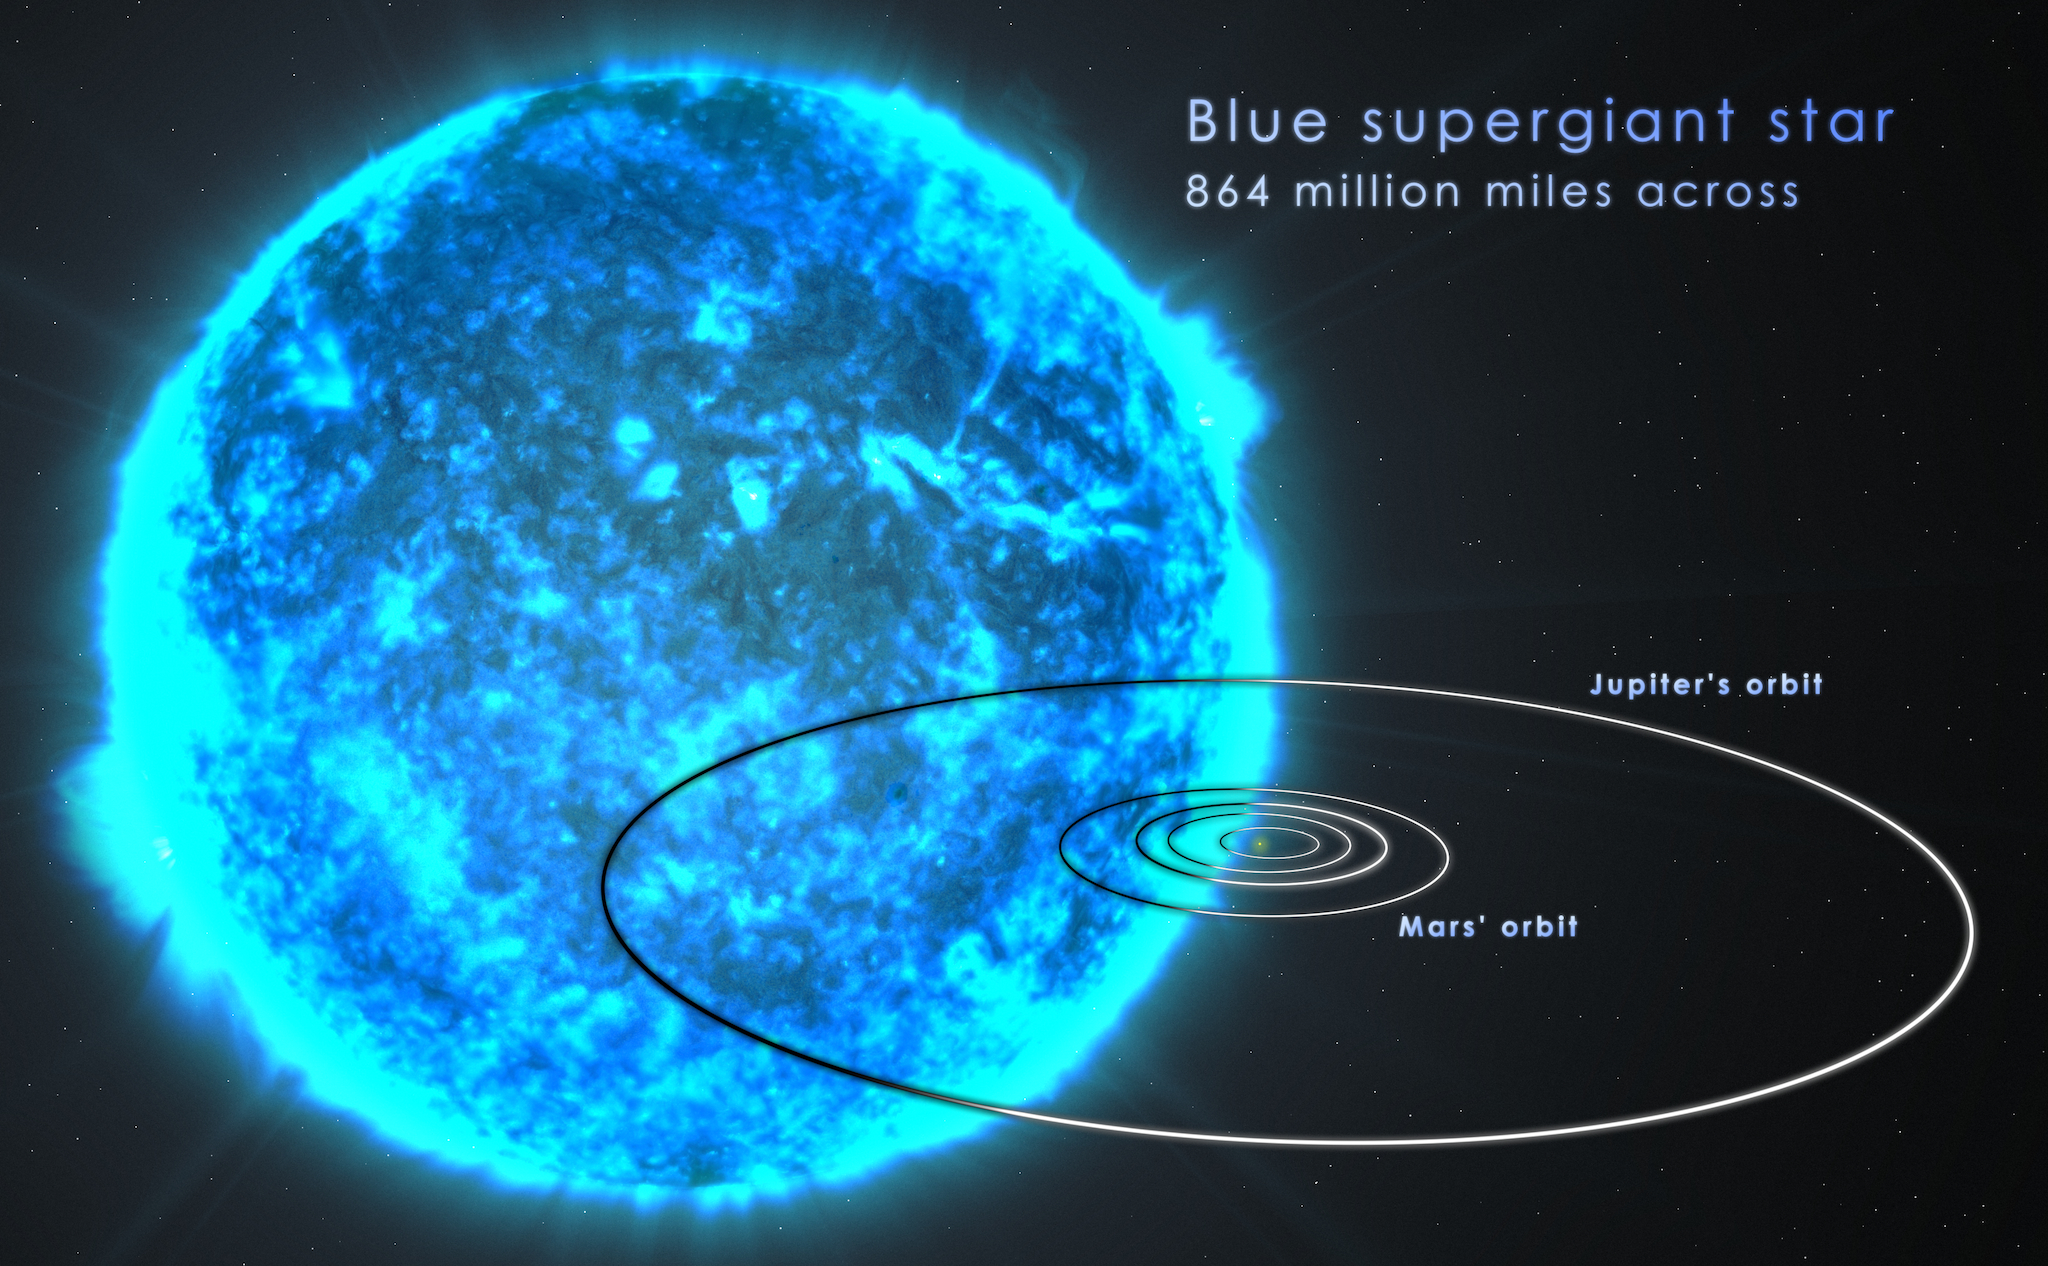 Astronomers suggest that blue supergiant stars may be the most likely sources of ultra-long GRBs. These stars hold about 20 times the Sun's mass and may reach sizes 1,000 times larger than the Sun, making them nearly wide enough to span Jupiter's orbit. Credit: NASA's Goddard Space Flight Center/S. Wiessinger